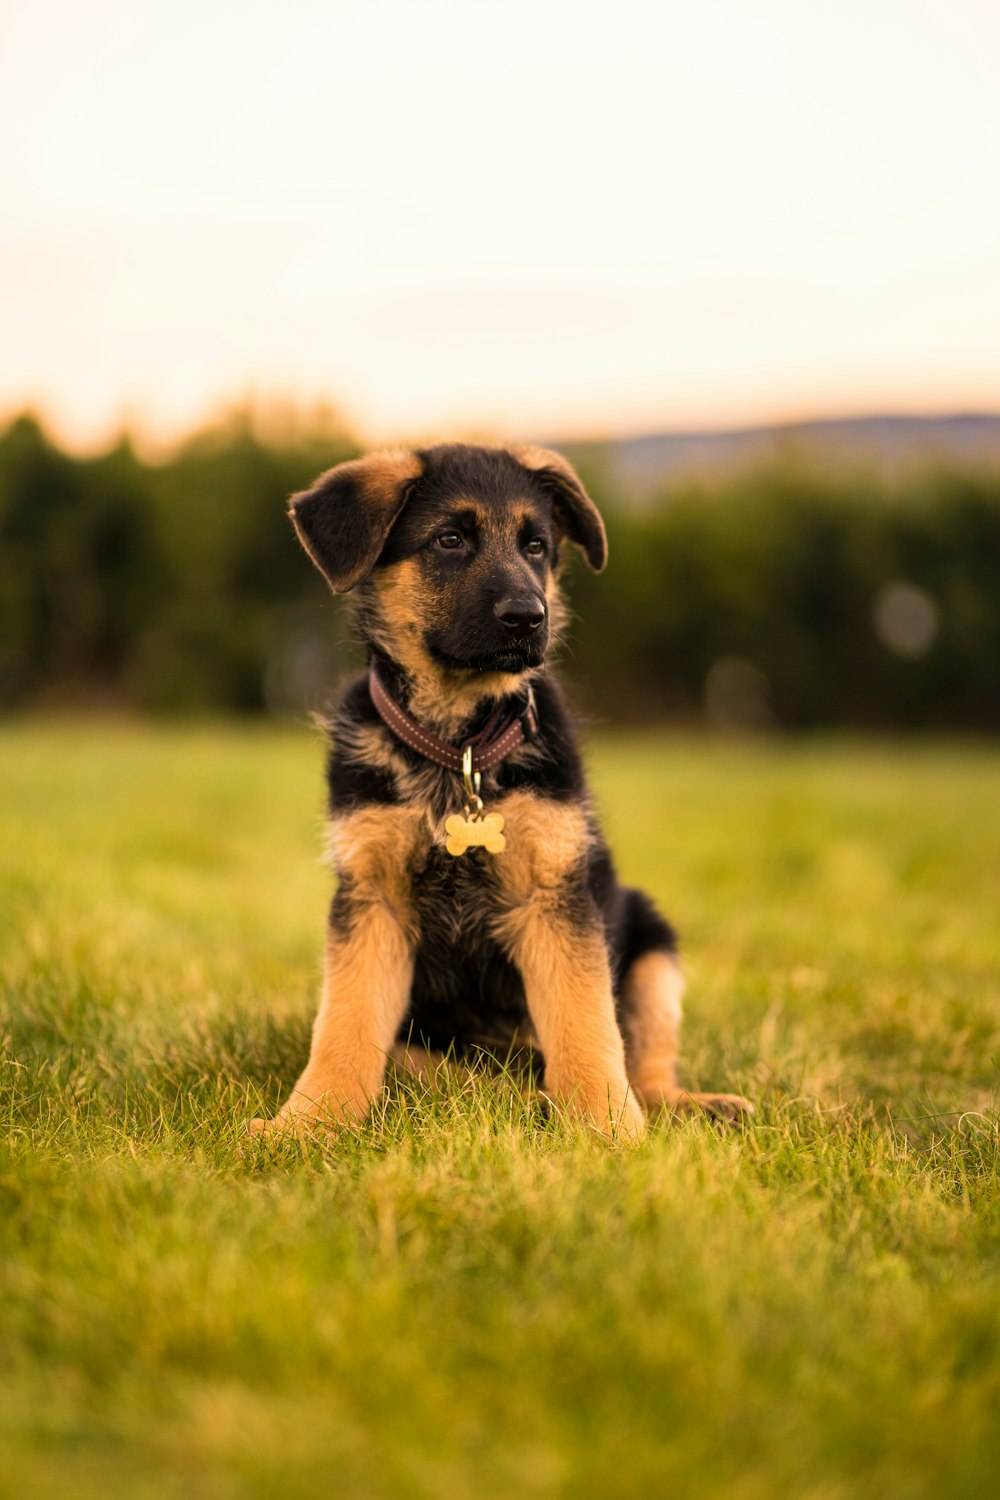 black and tan short coat puppy running on green grass during daytime